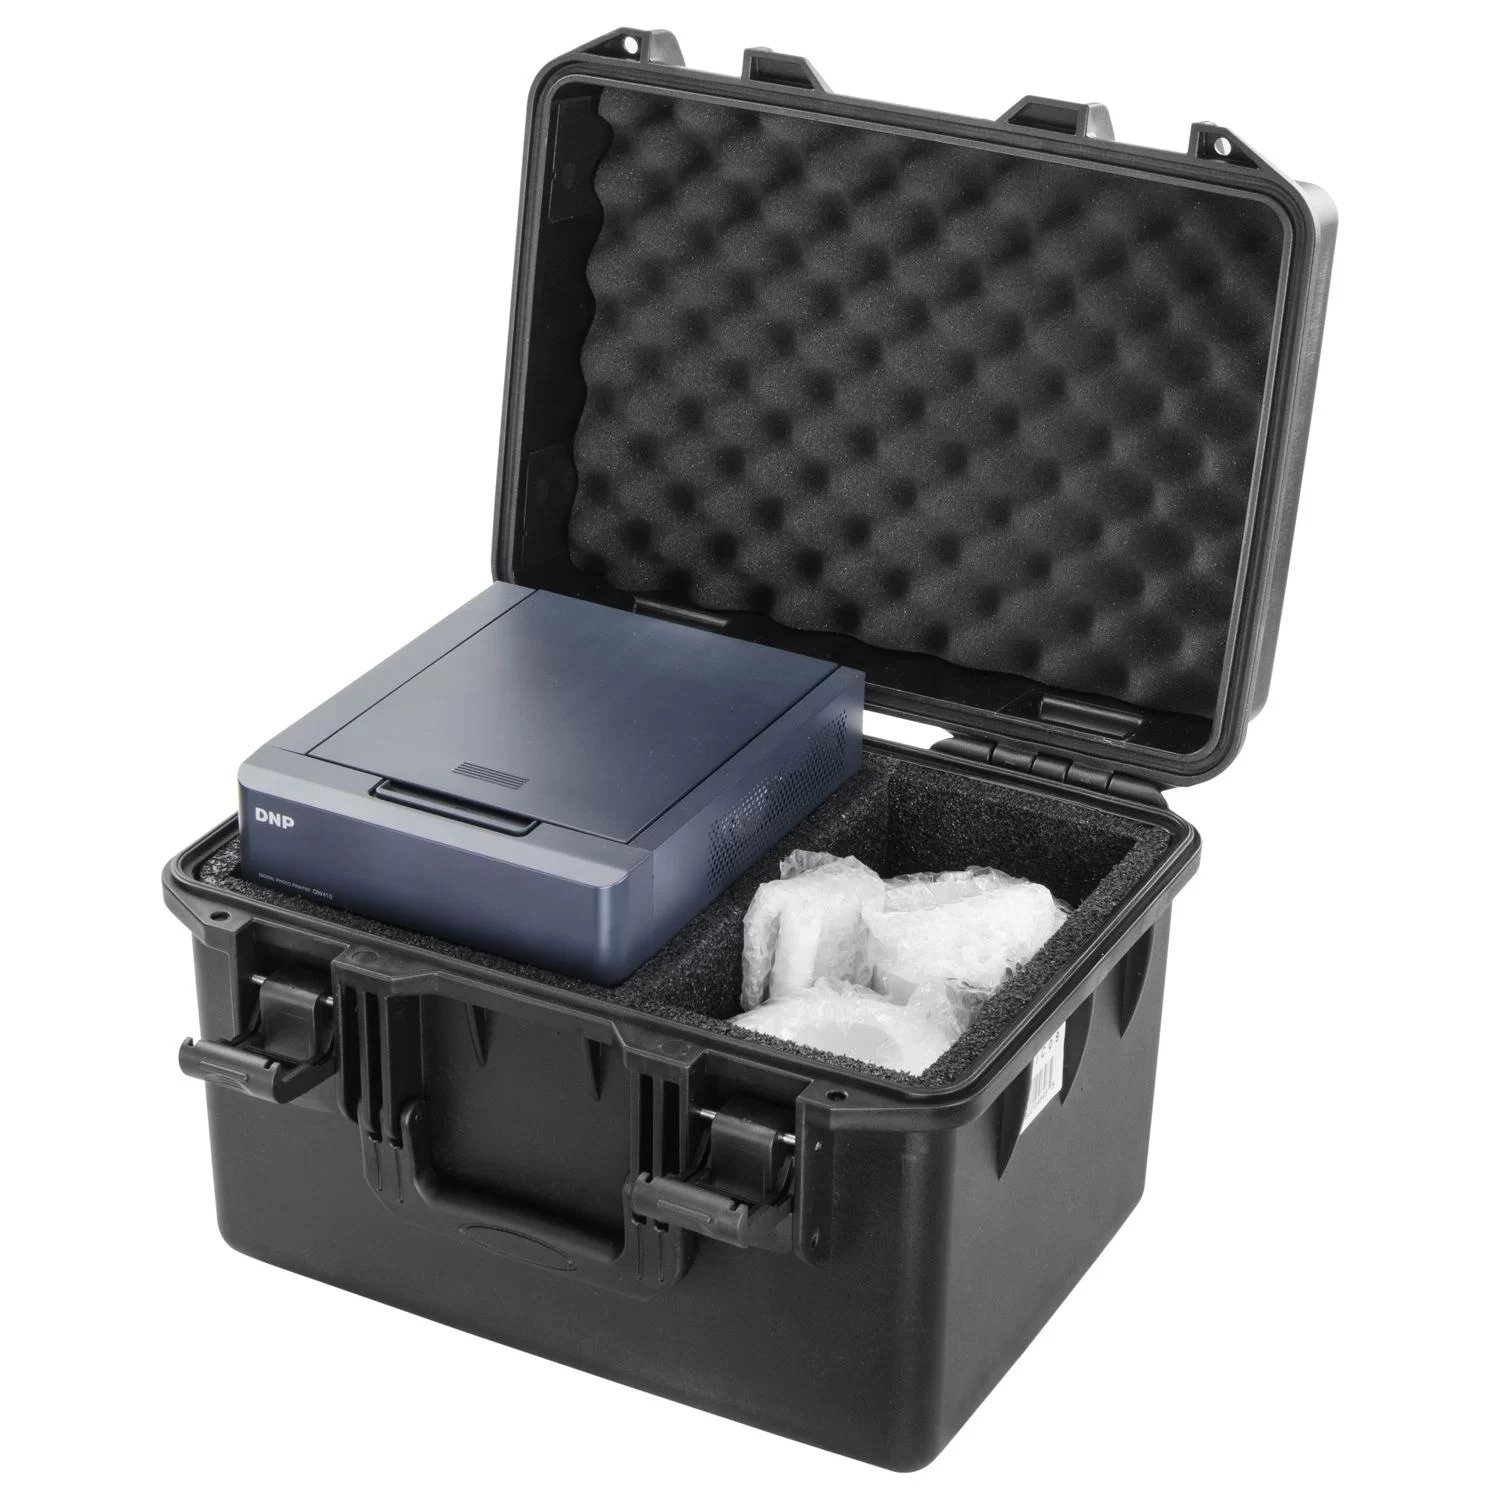 Odyssey Dustproof and Watertight Case for DNP QW410 Photo Printer